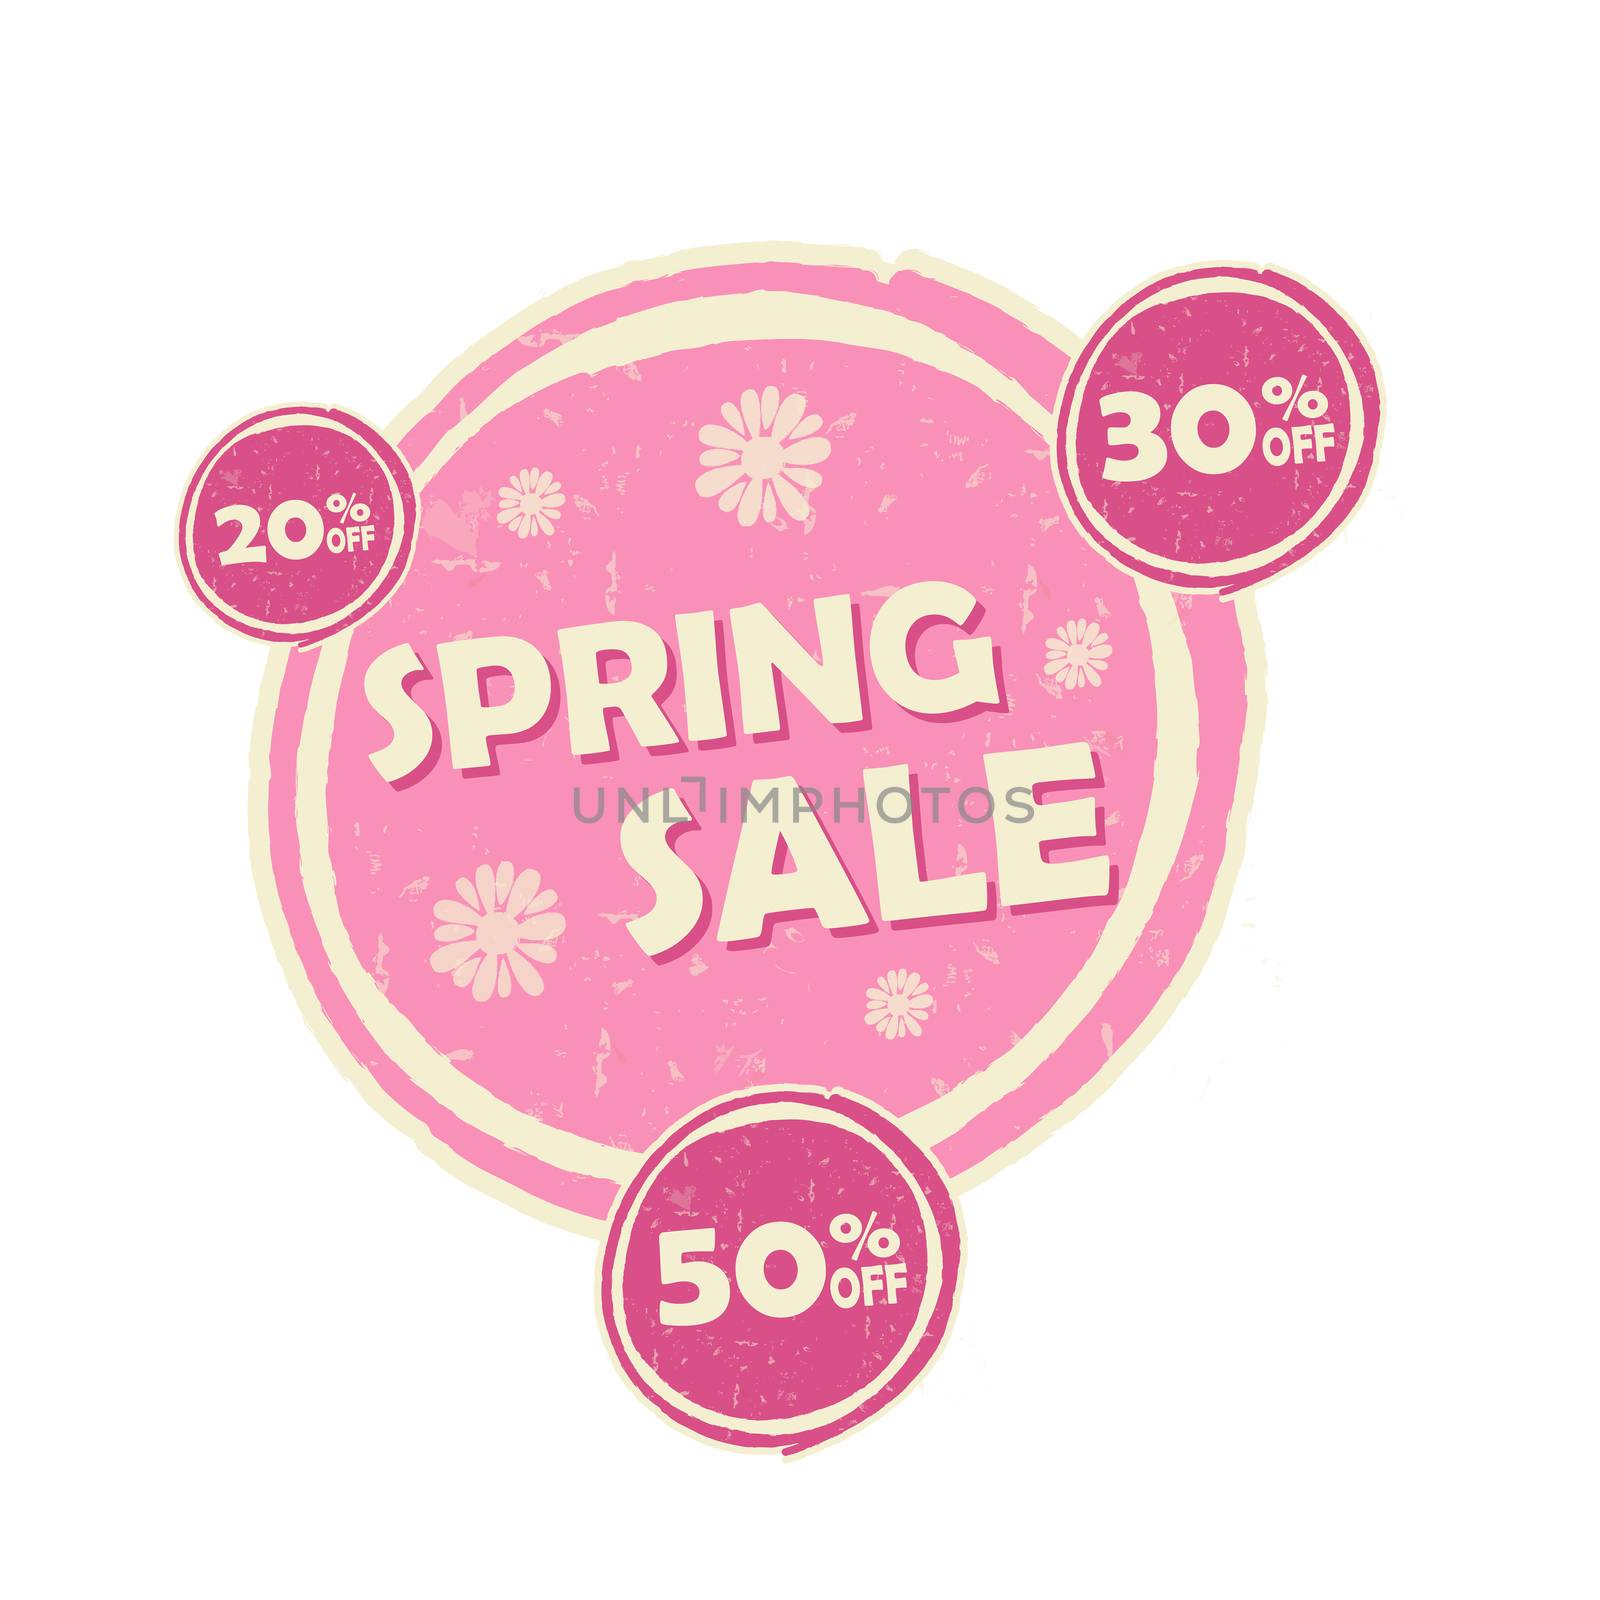 spring sale and 20, 30, 50 percentages off banner - text in pink circular drawn label, business seasonal shopping concept